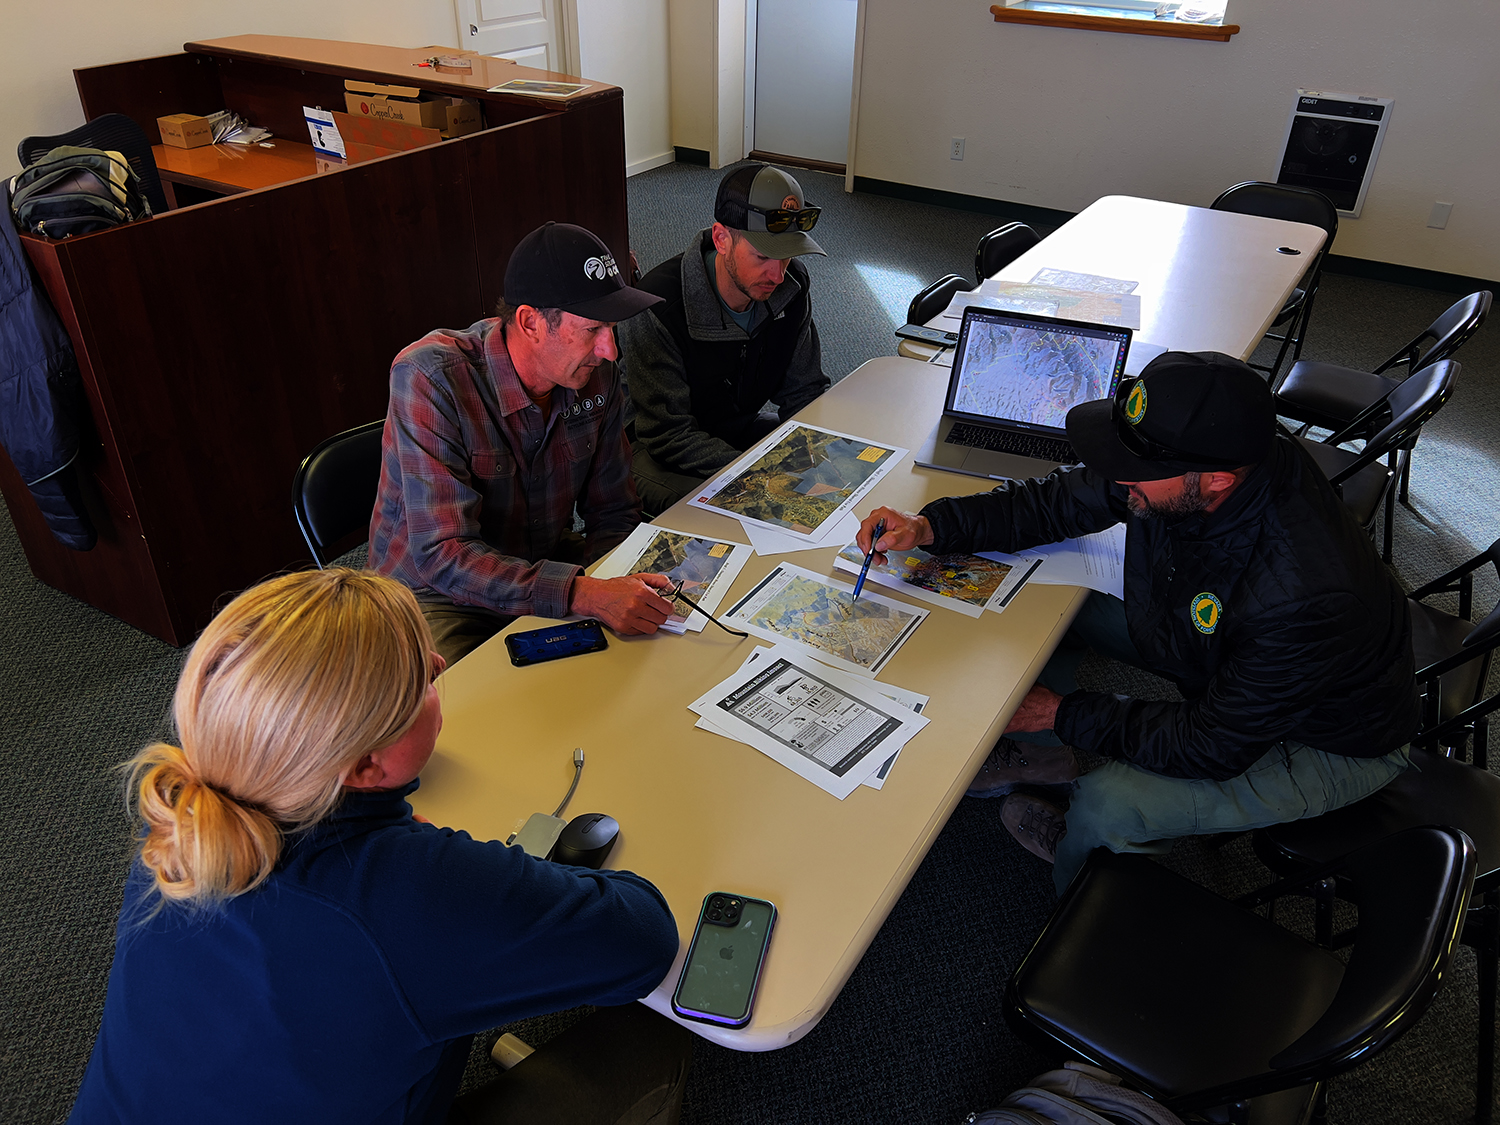 "Five people sitting at a table looking over GIS planning documents in an office setting."